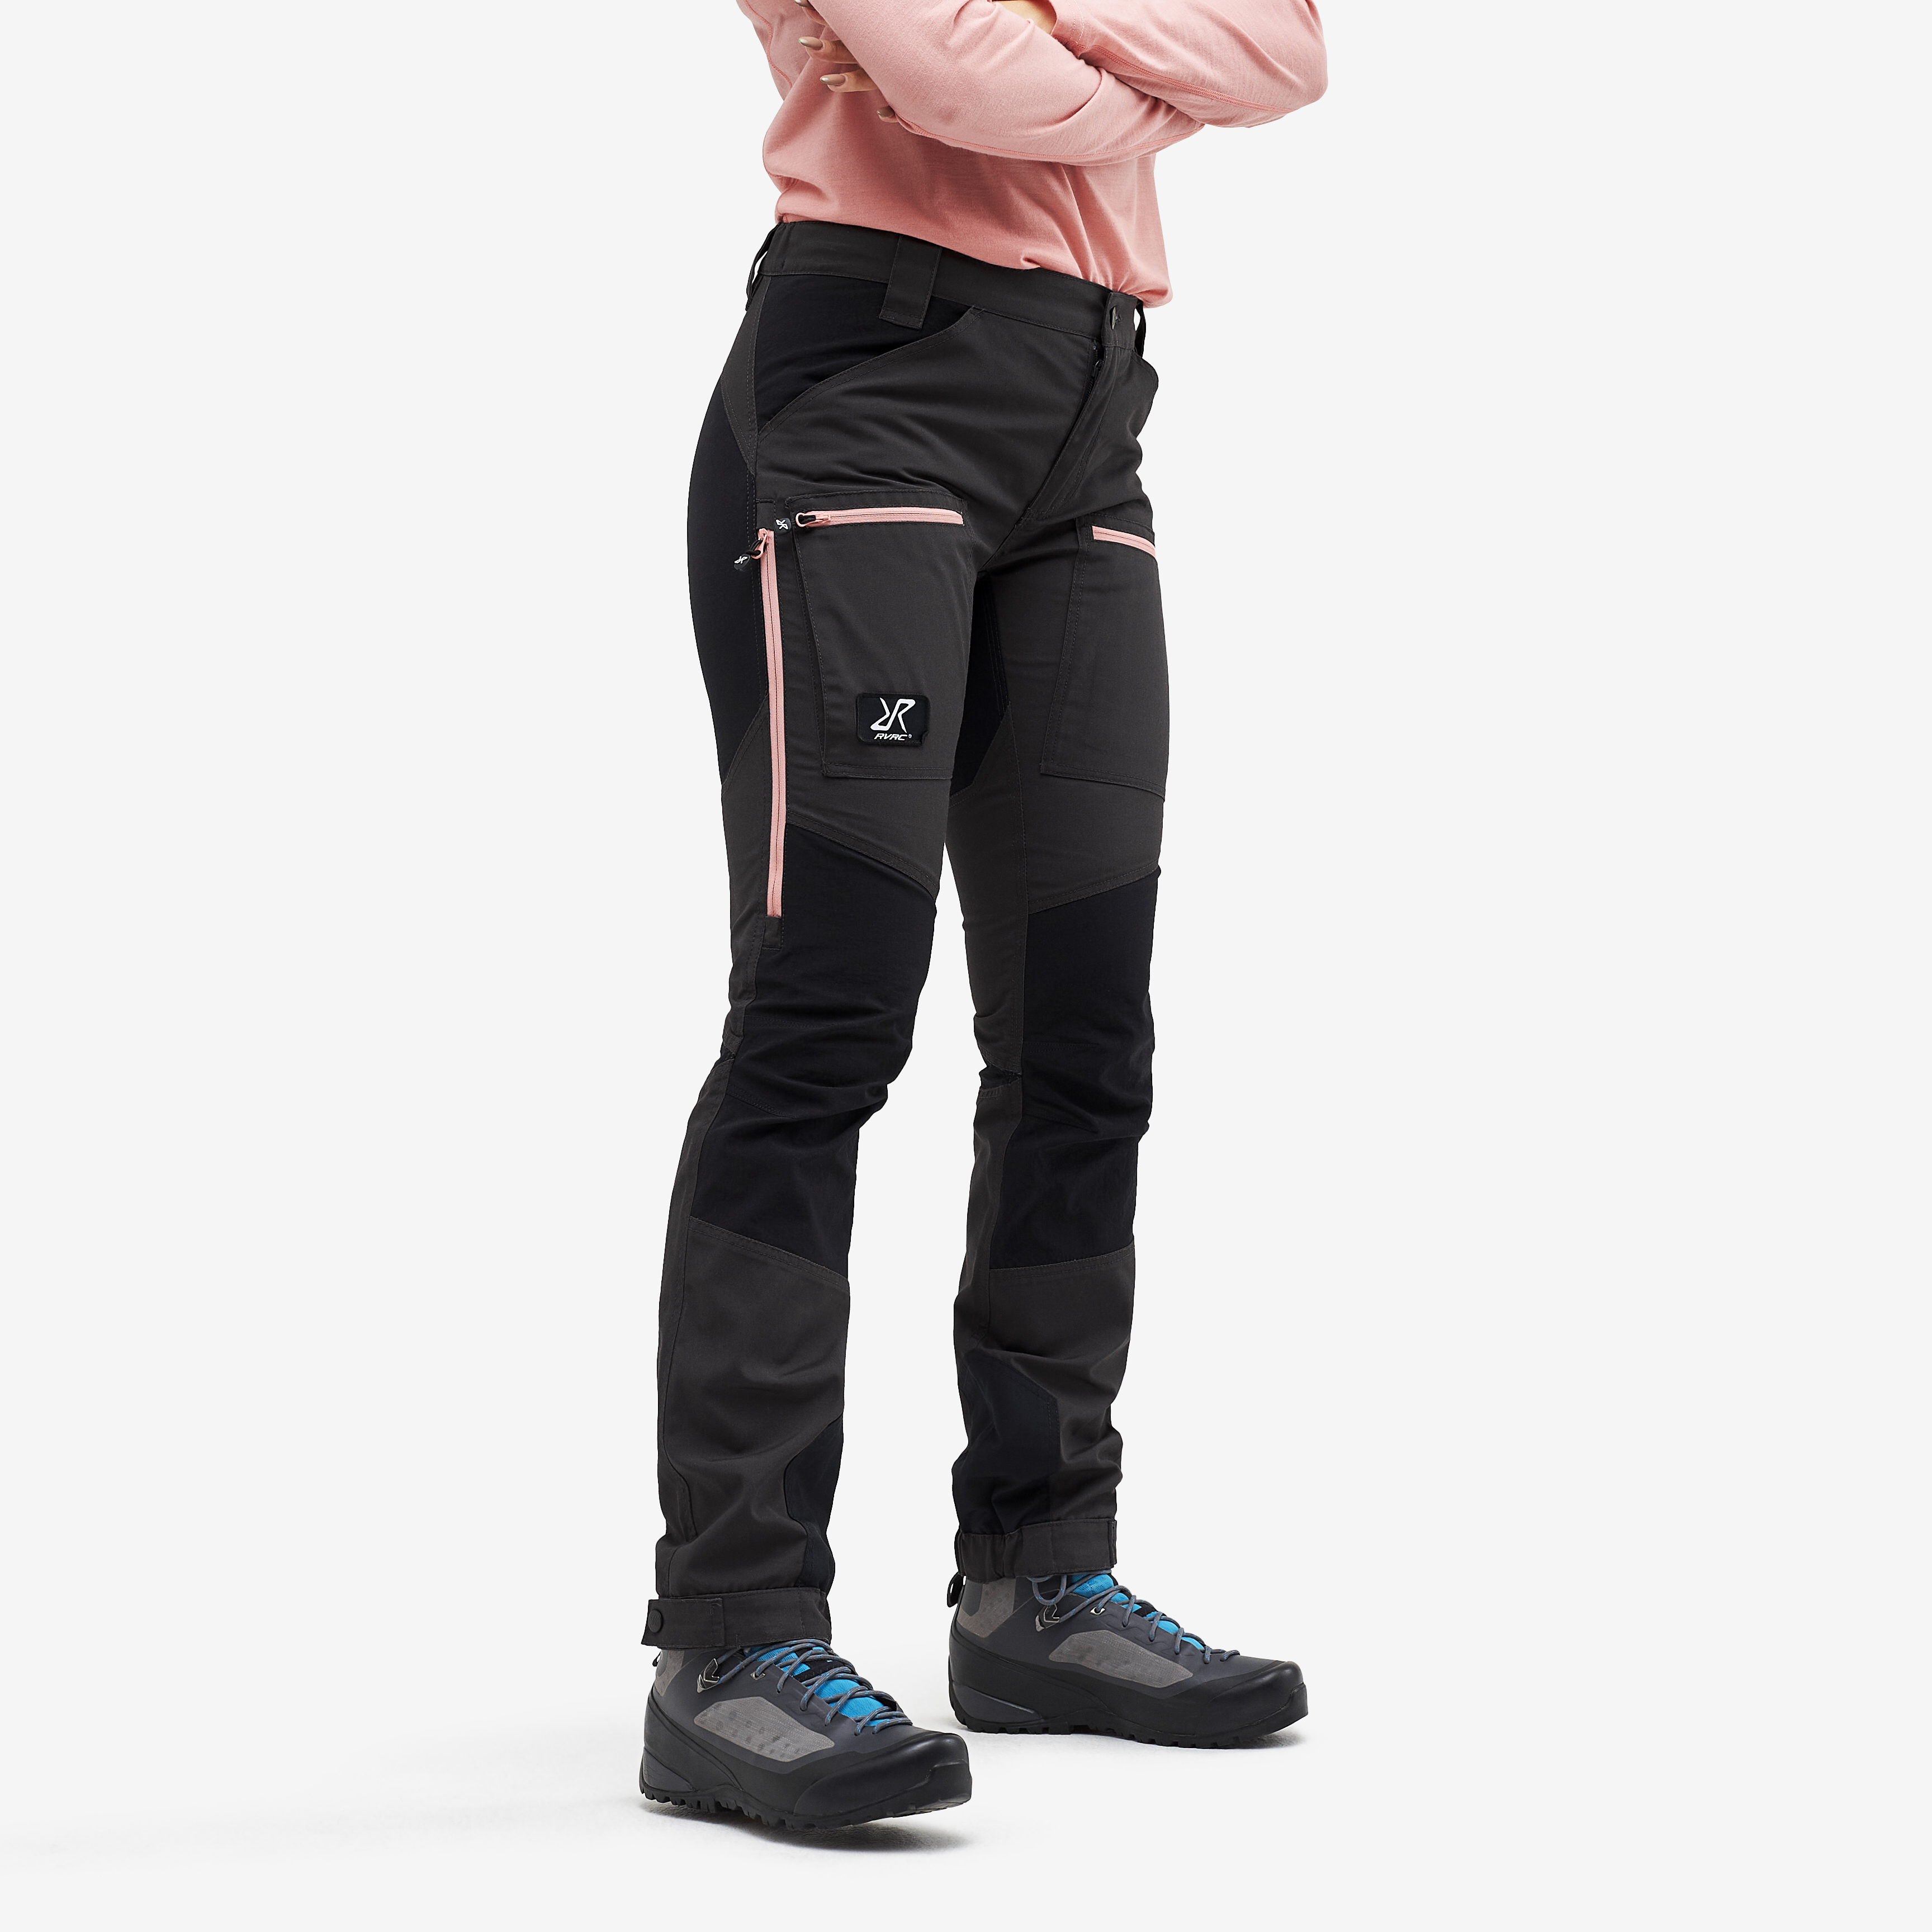 Nordwand Pro Pants Anthracite/Dusty pink Damen